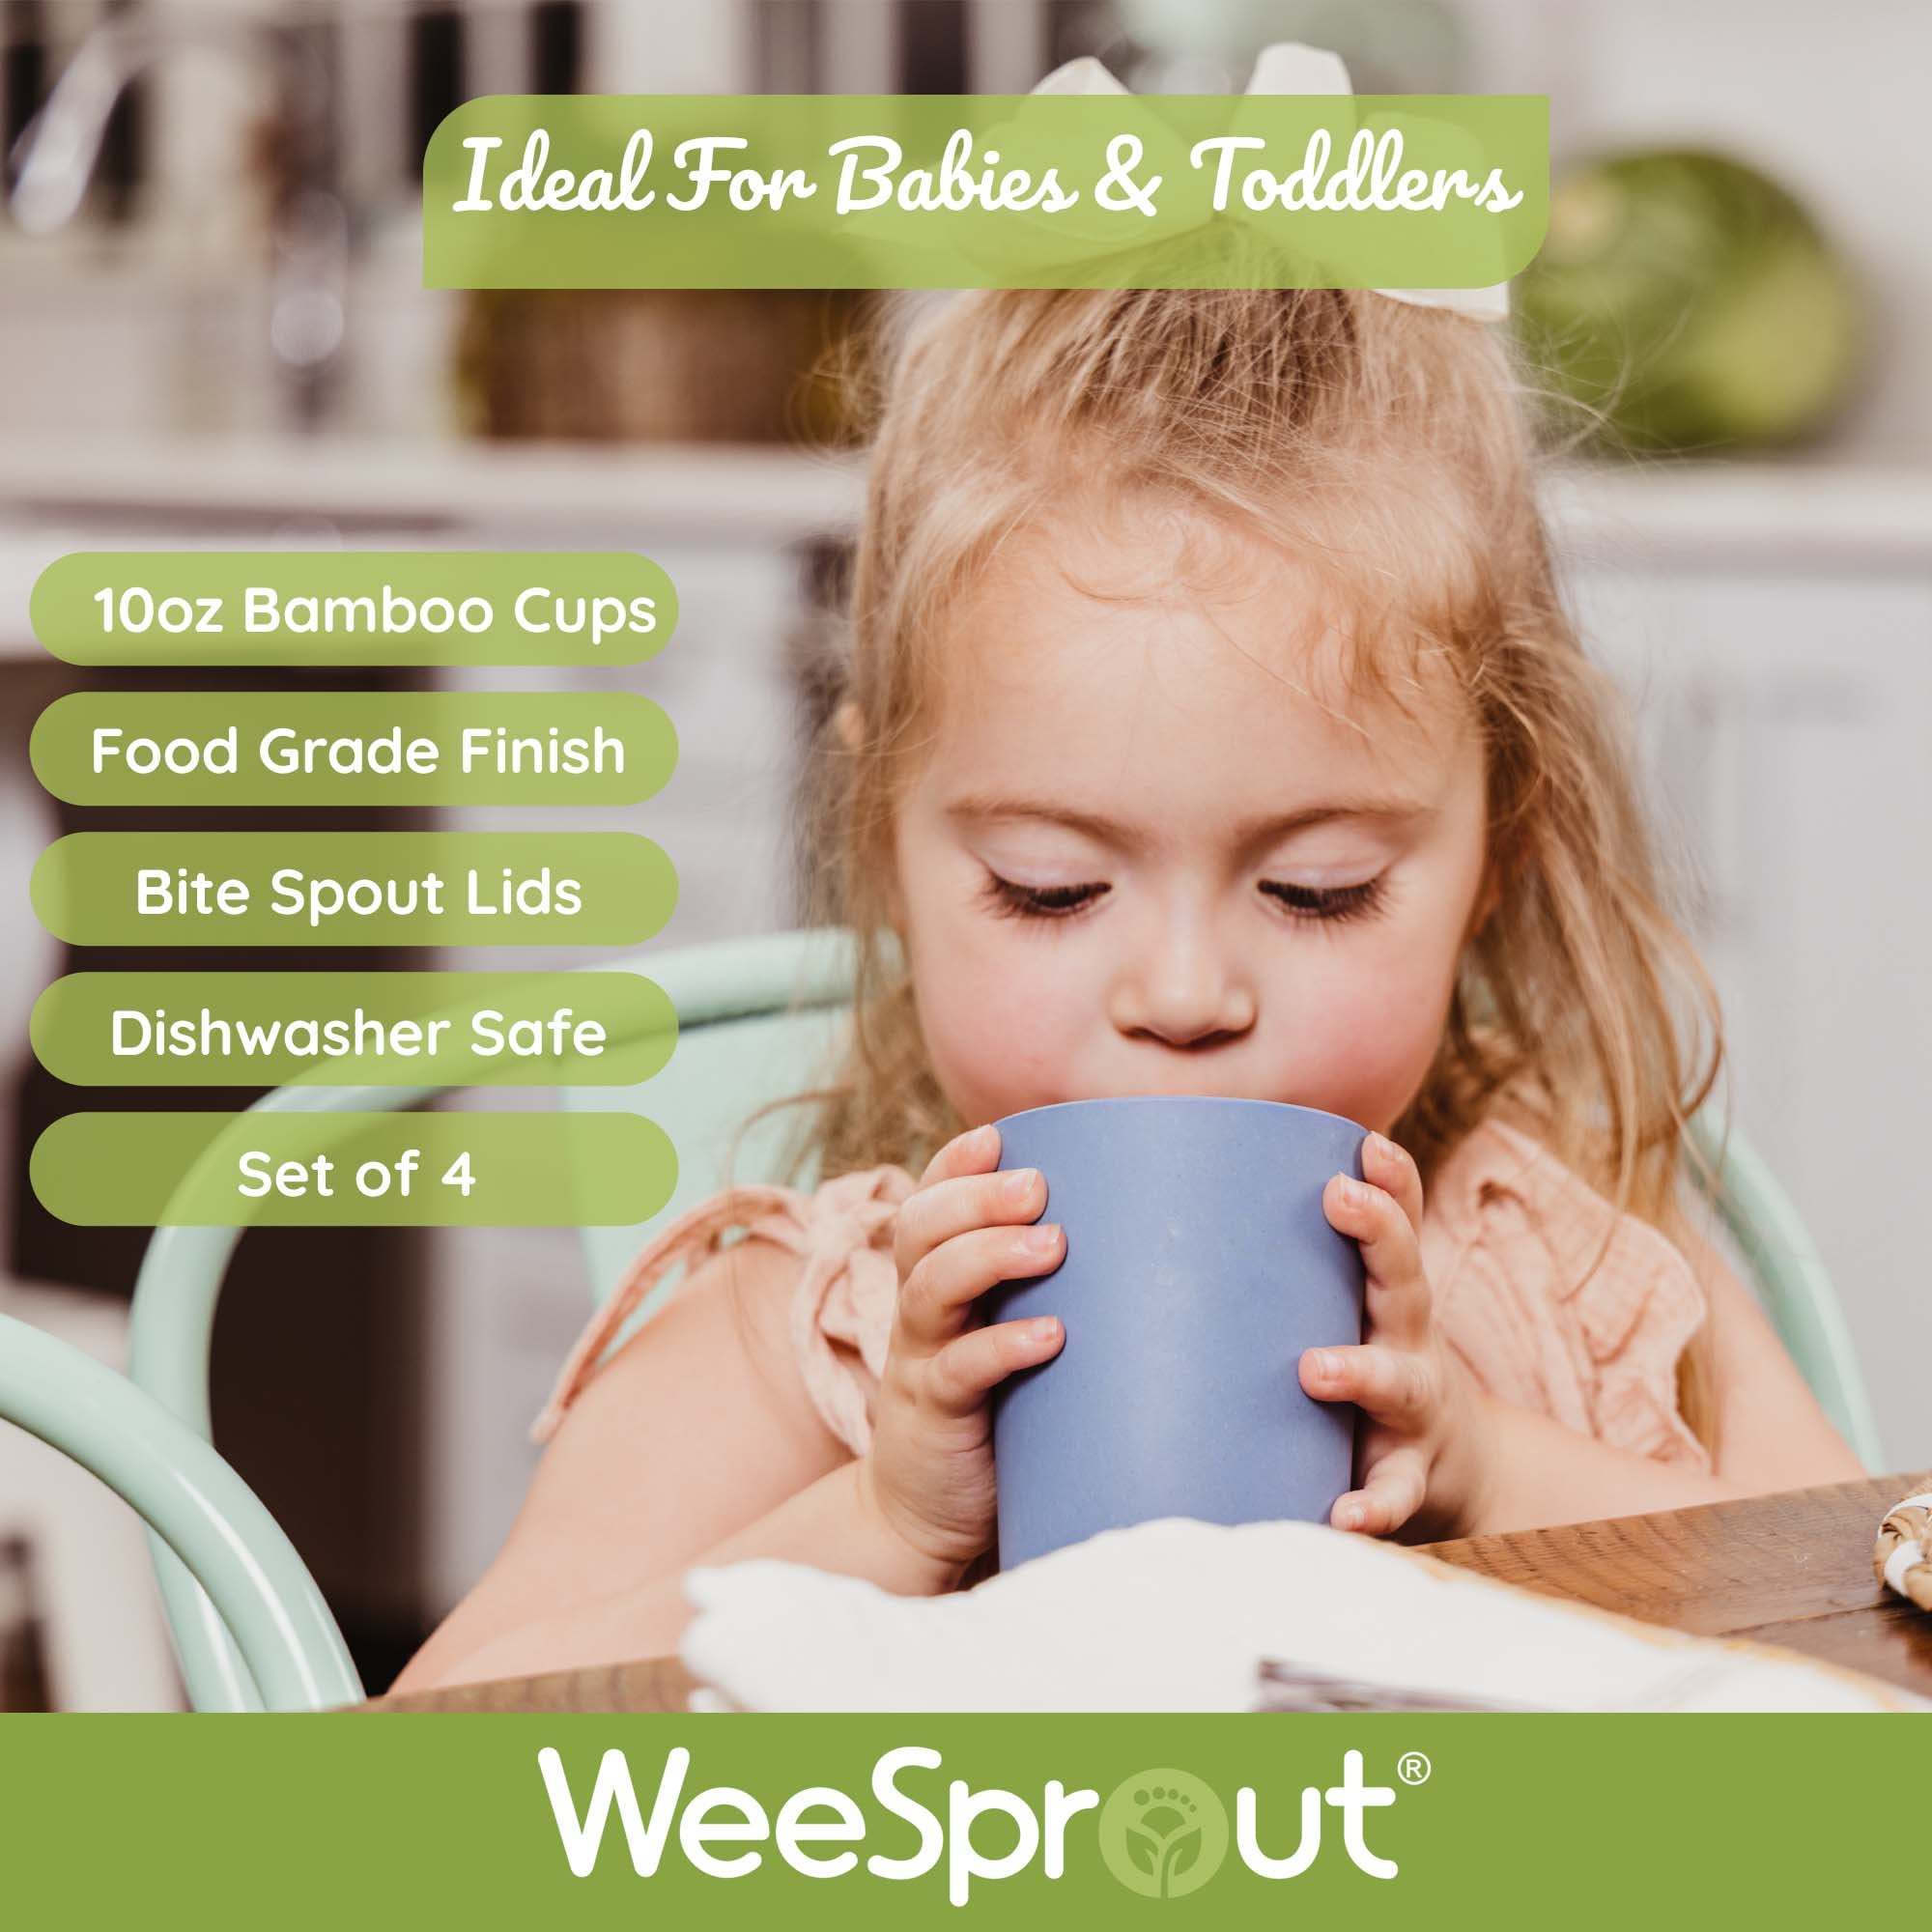 WeeSprout Bamboo, Silicone, Melamine Grow-With-Me Sippy Drinking Cup, Set of four 10 Ounces Kids Baby and Toddler, Made with All Natural Bamboo and Bite Spout Design, Dishwasher Safe